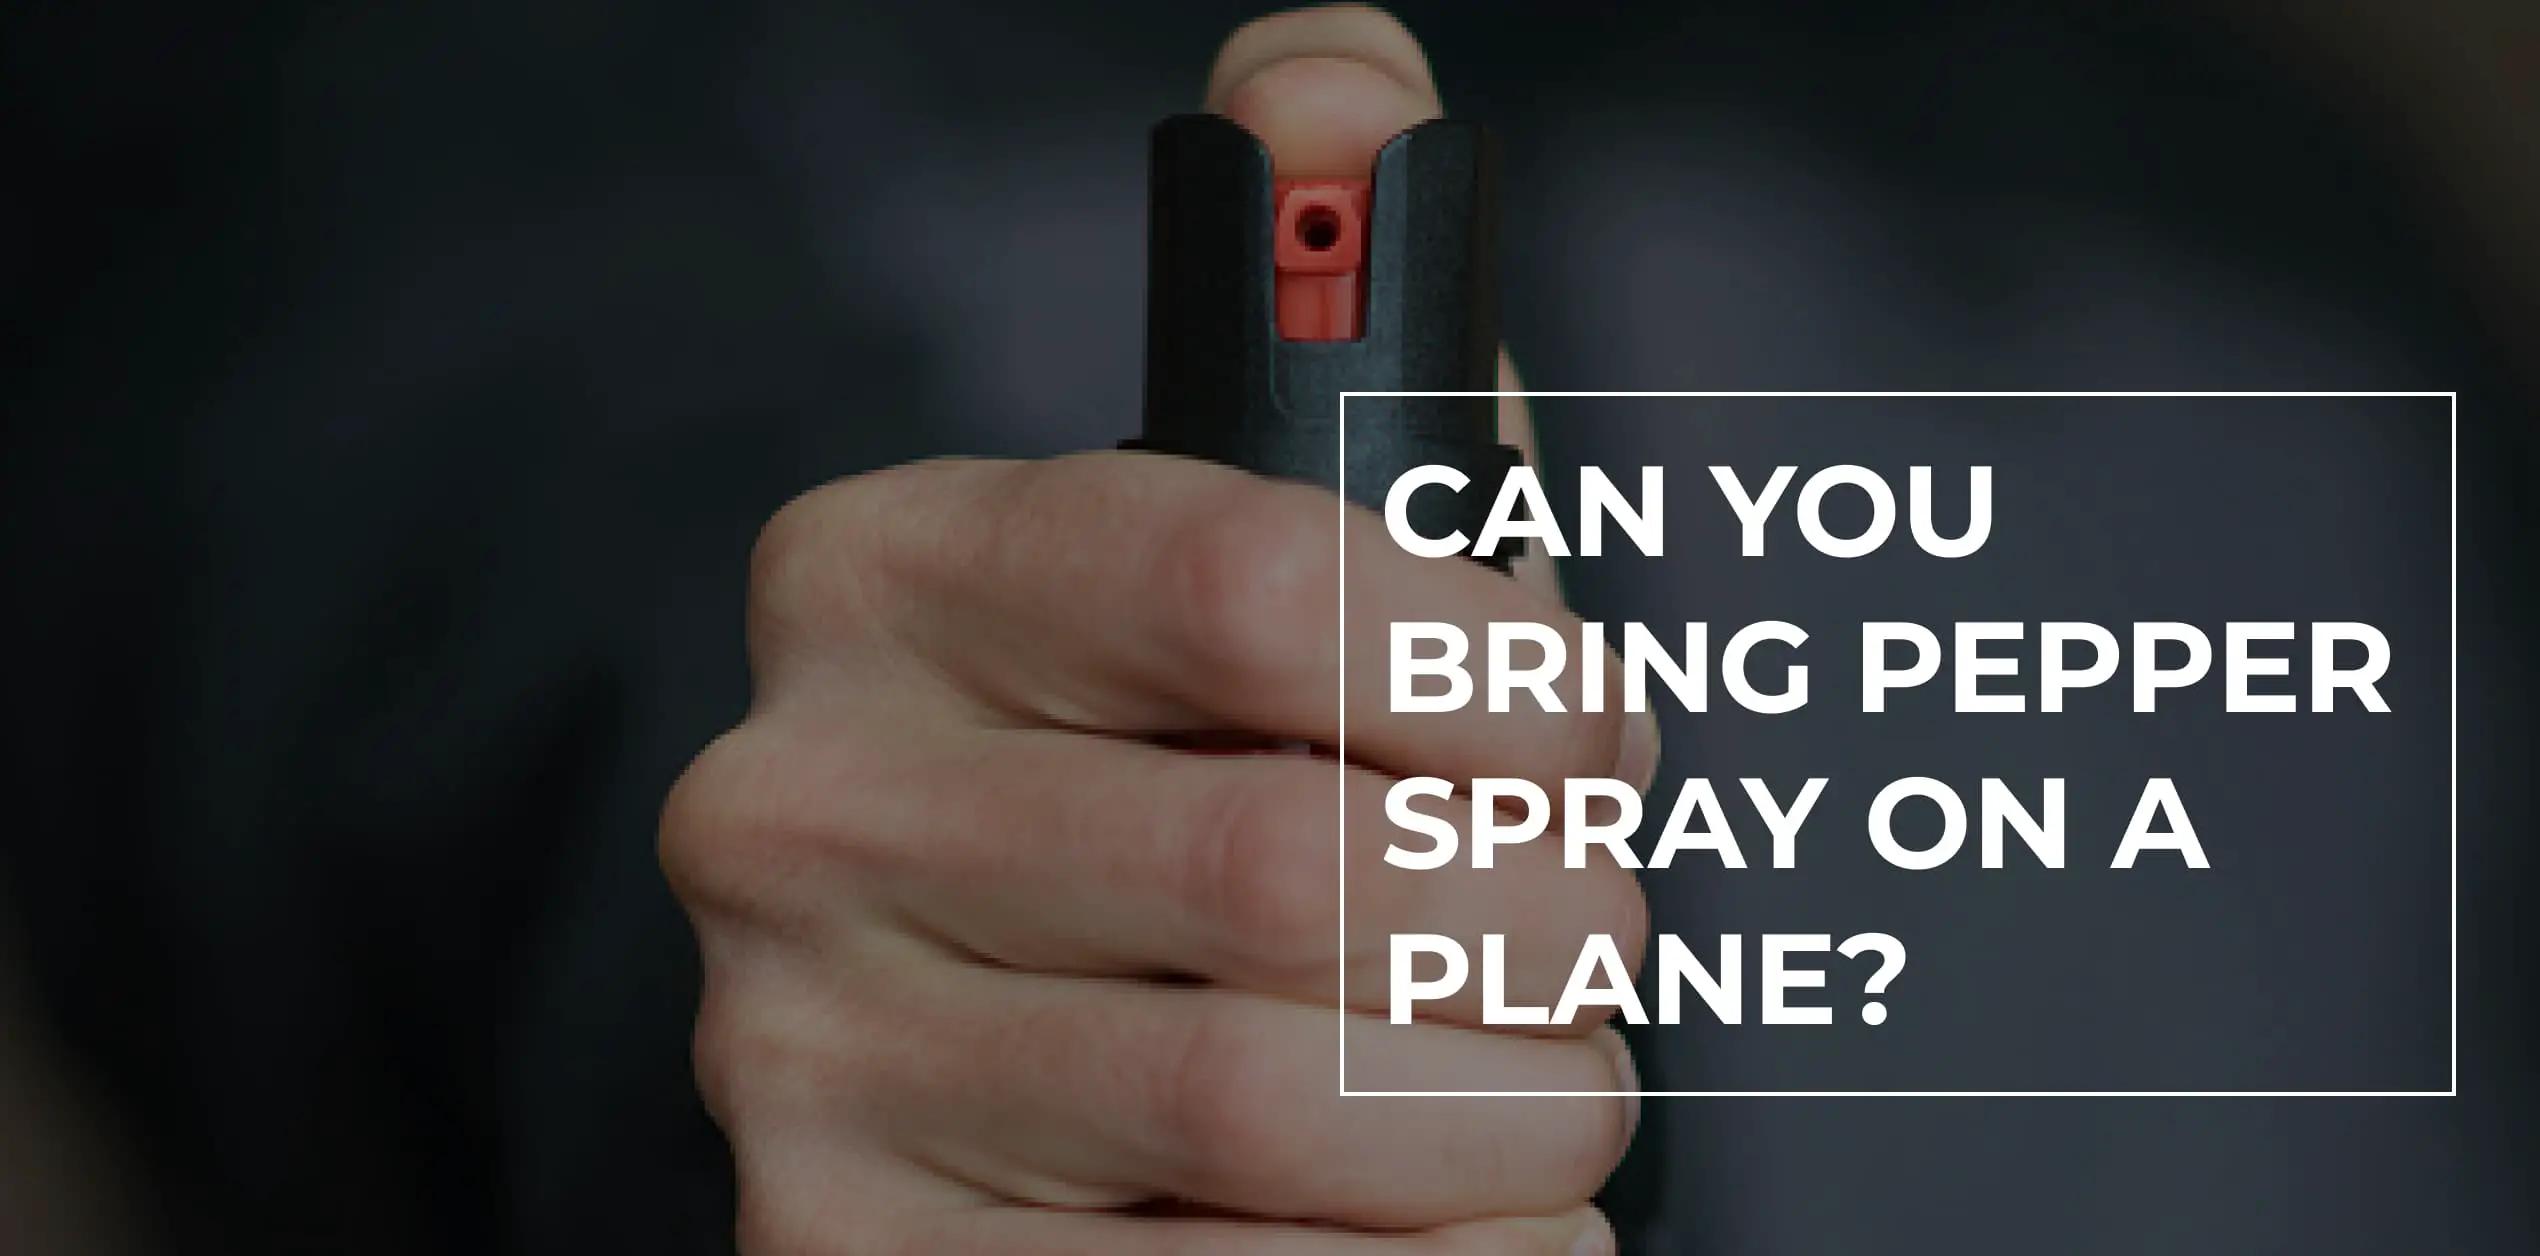 Can You Bring Pepper Spray on a Plane?